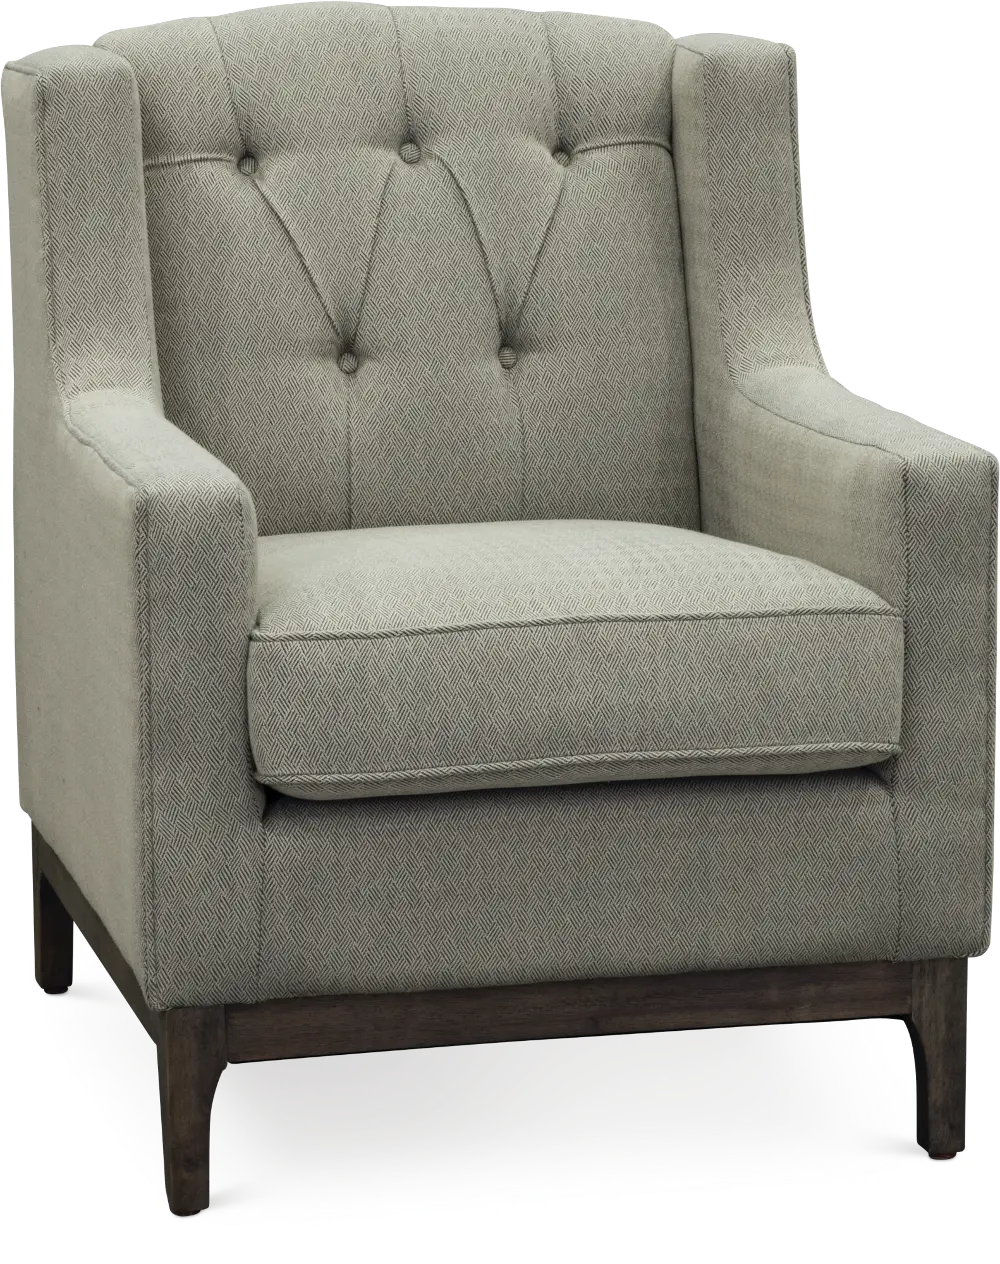 Beige and Black Tapestry Accent Chair - Princeton-1